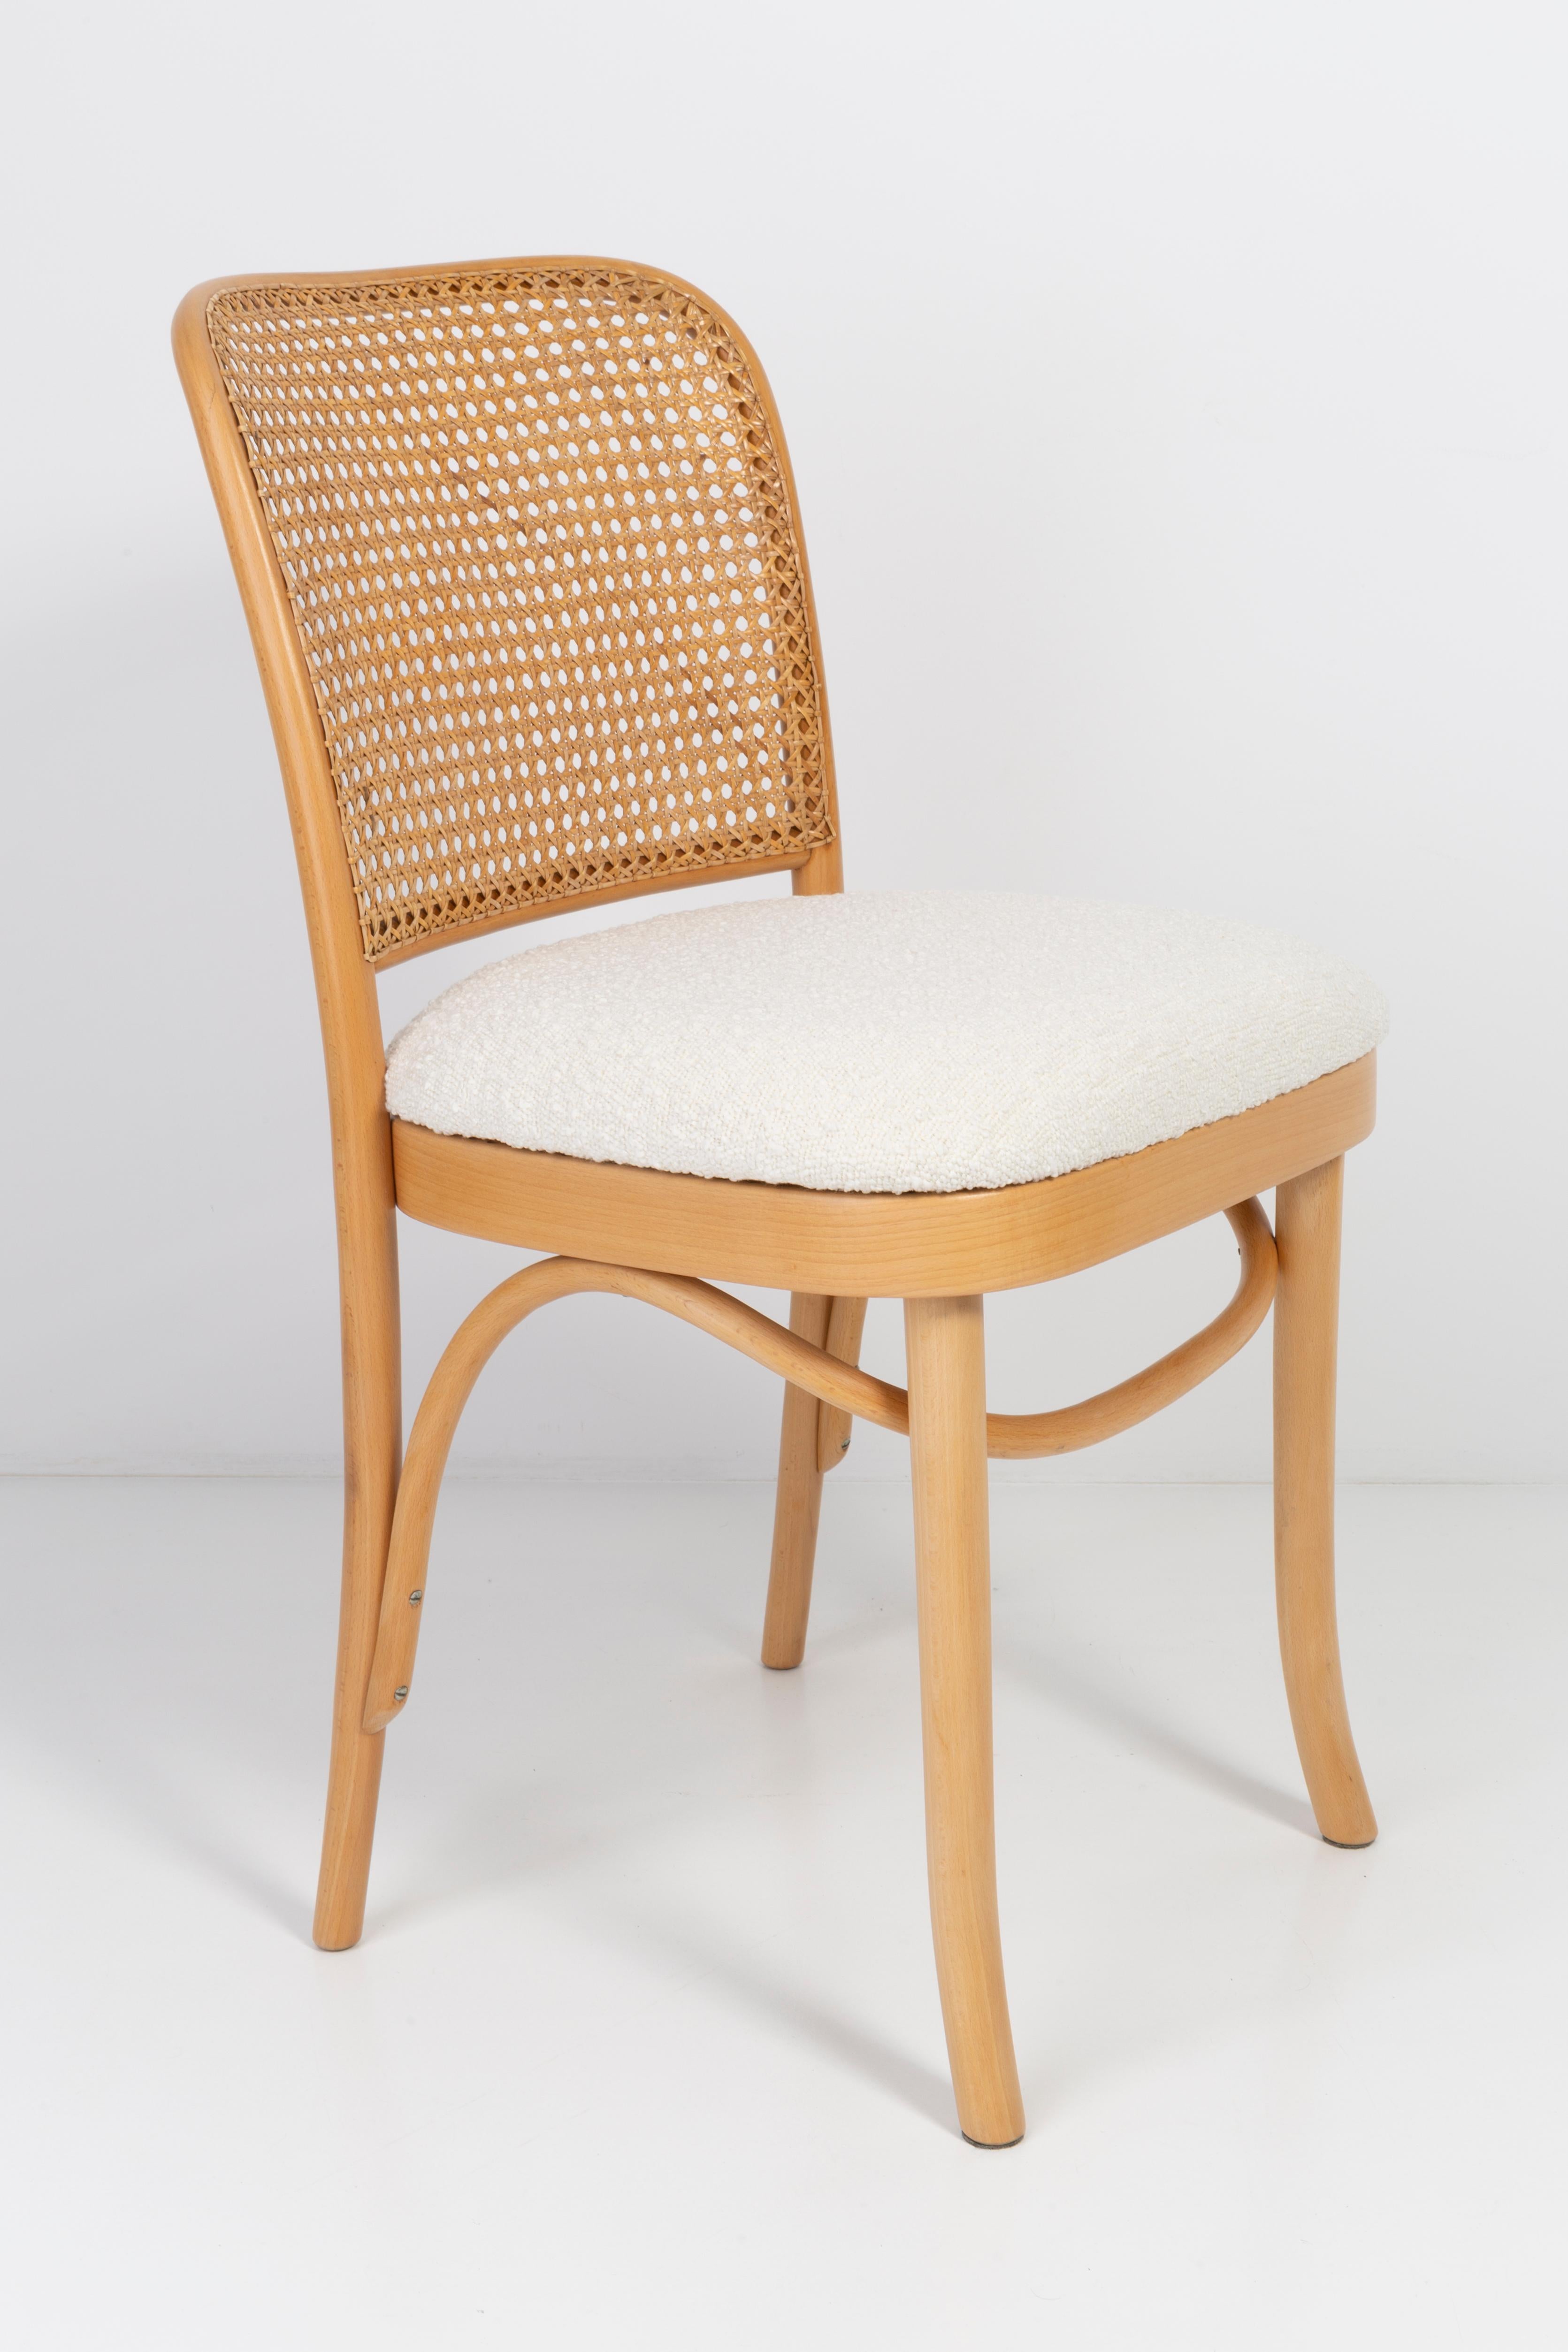 Velvet Set of Six White Boucle Thonet Wood Rattan Chairs, 1960s For Sale